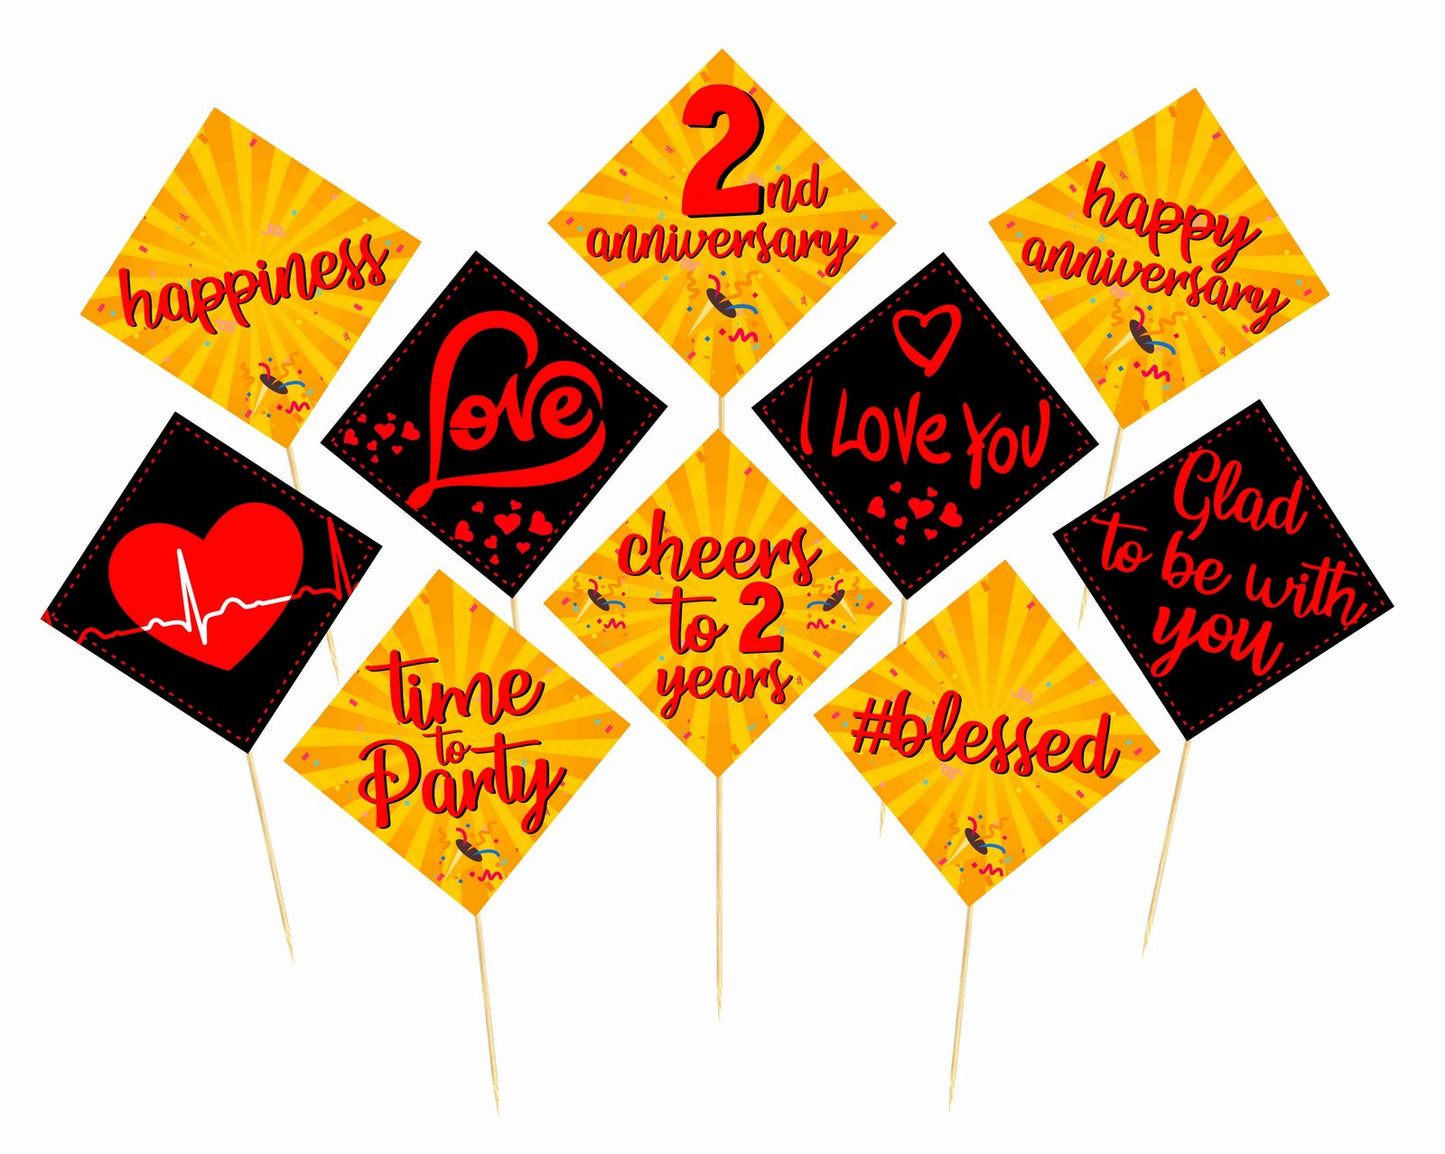 2nd Anniversary Theme Props Anniversary Decoration Backdrop Photo Shoot, Photo Booth Party Item for Adults and Kids